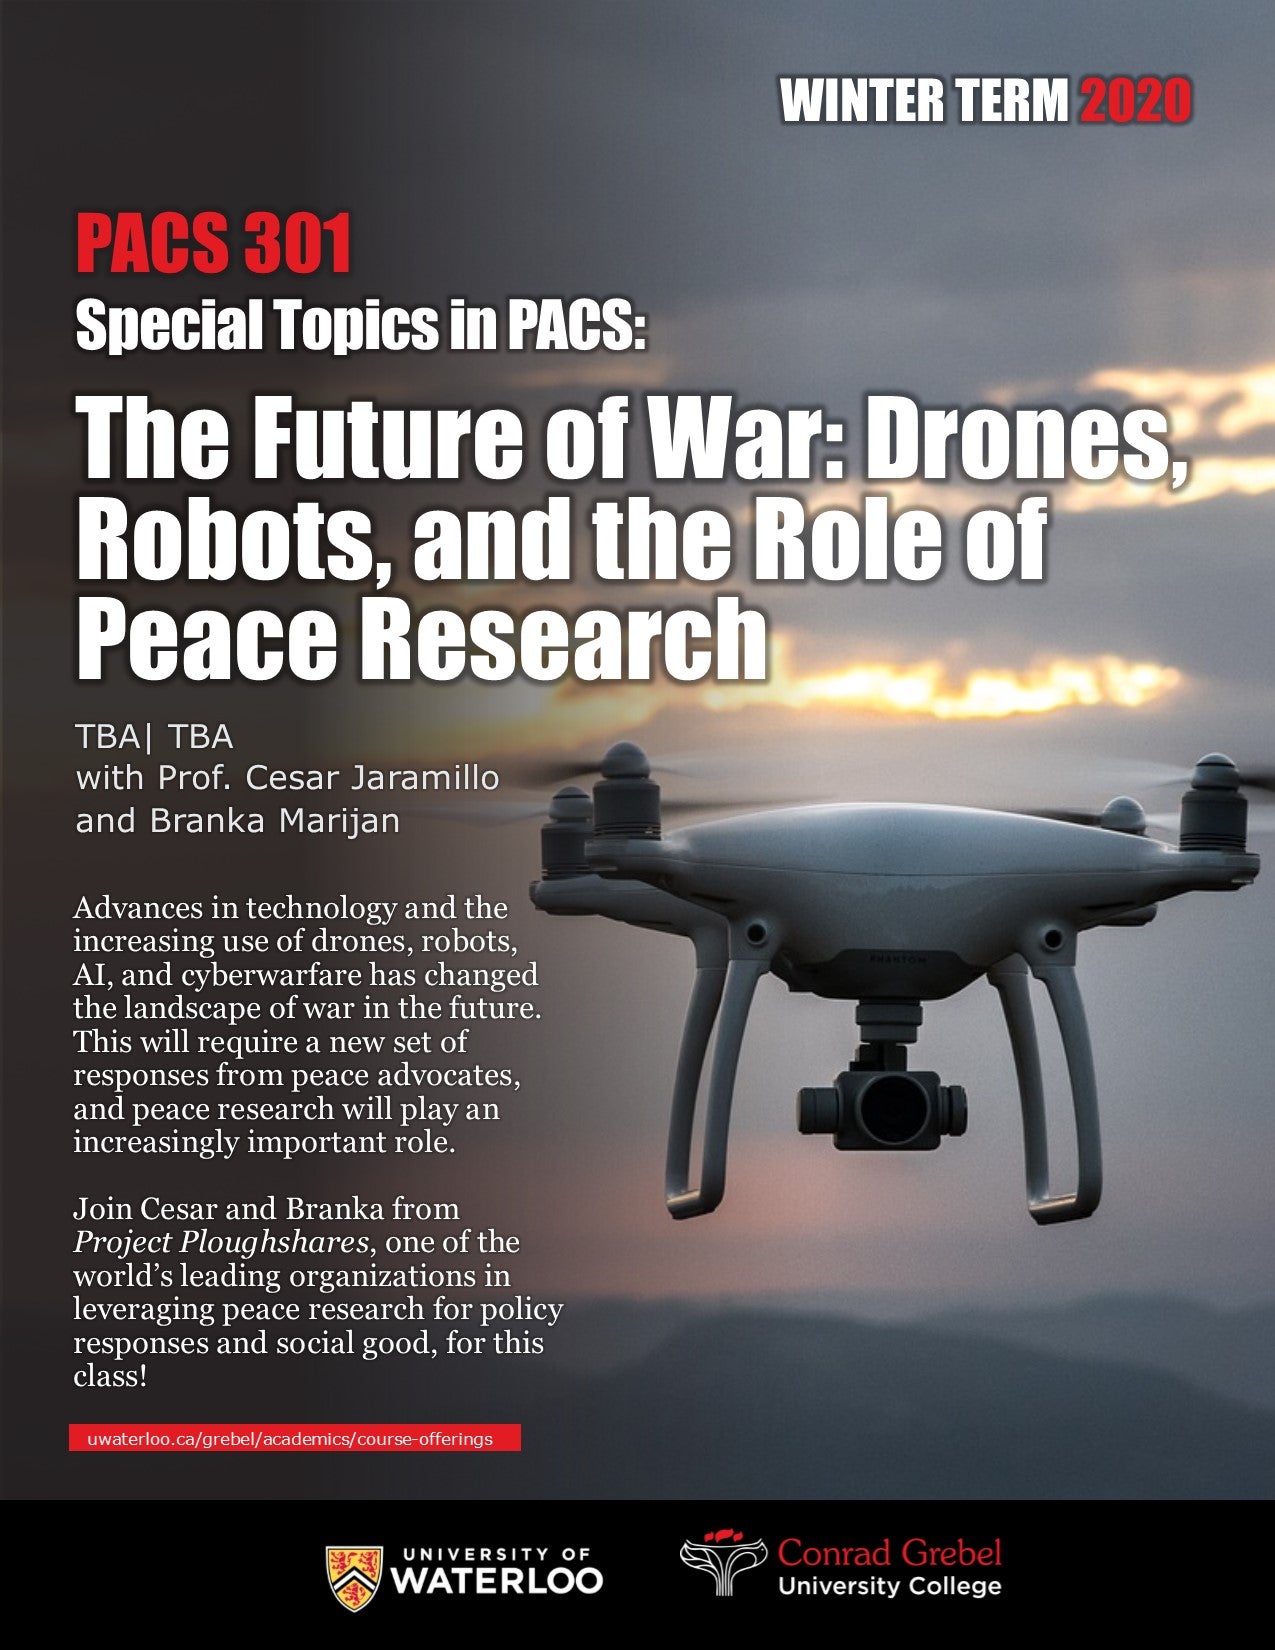 PACS 301 Poster